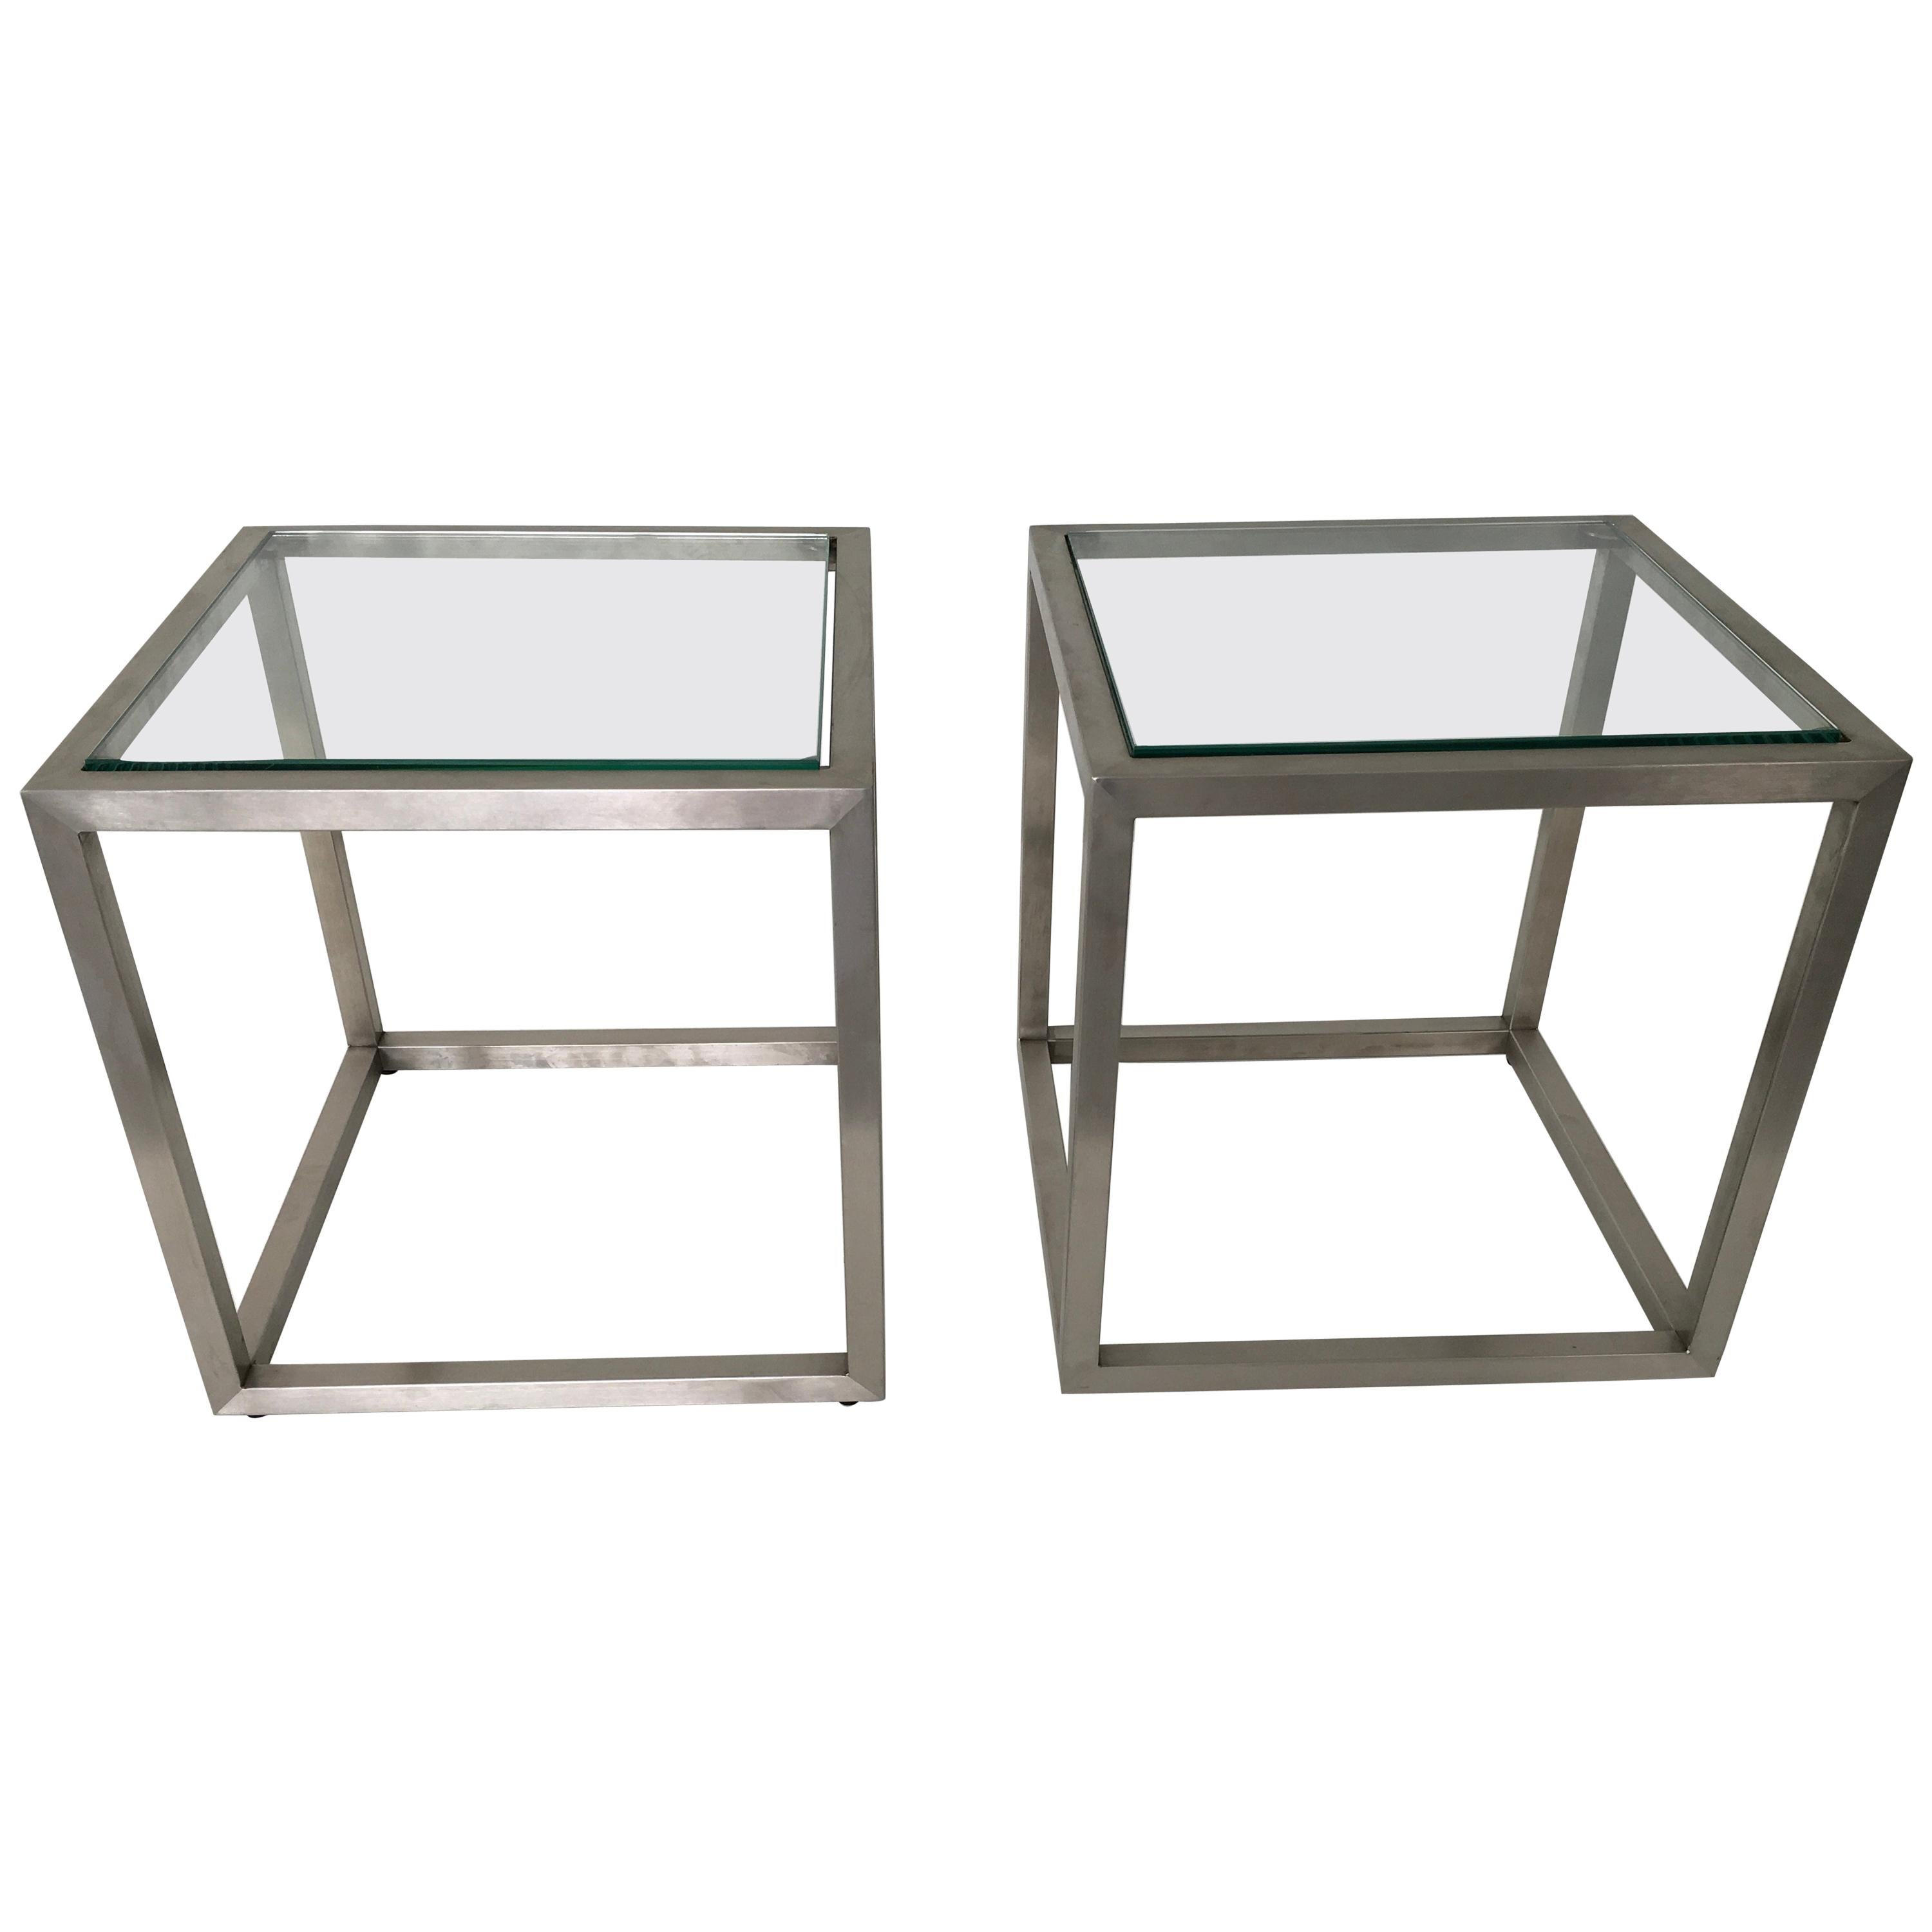 Guy Lefevre Stainless Cube Side Tables For Sale